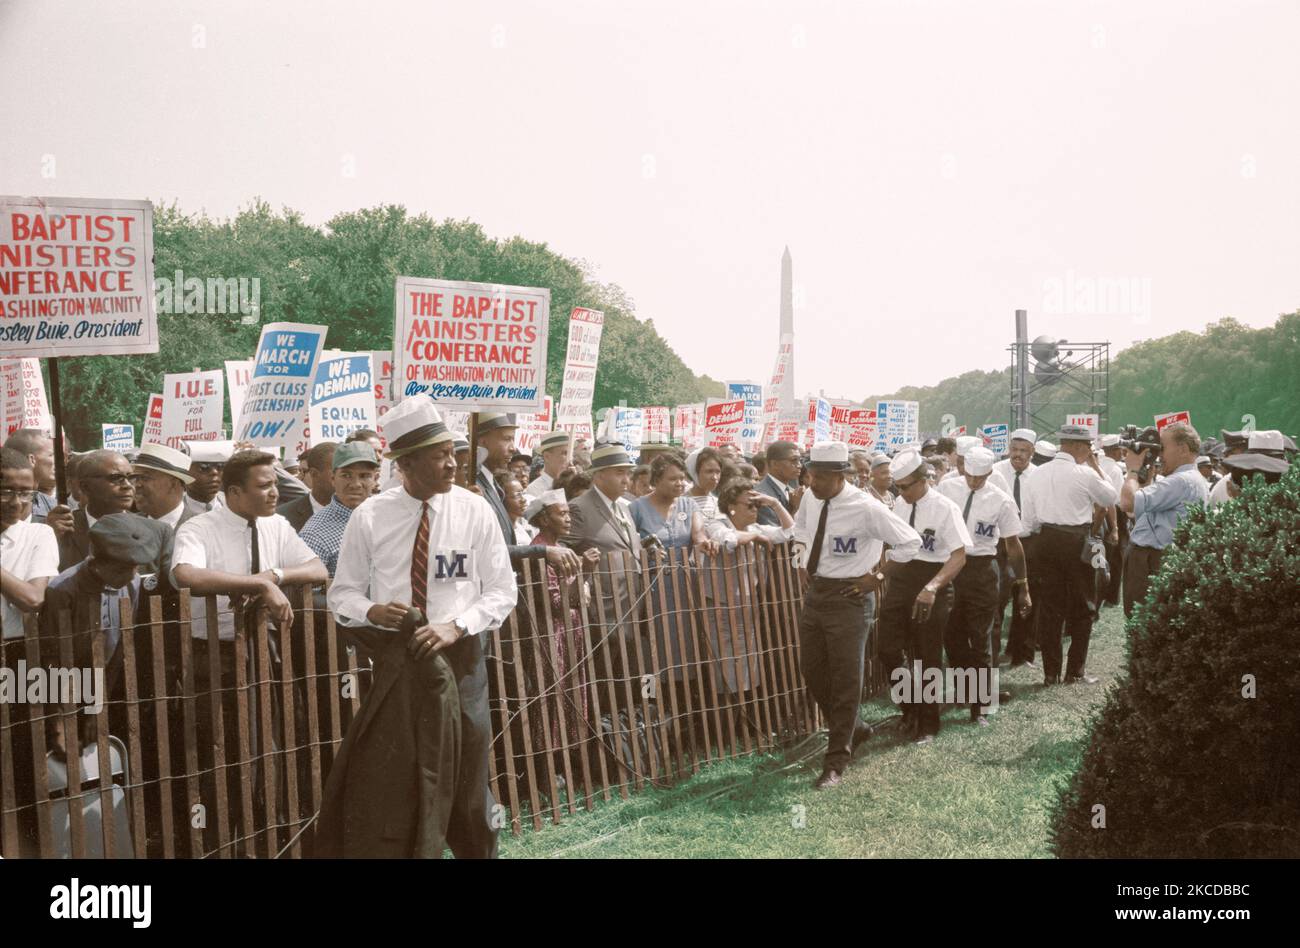 Marshals standing by fence near crowd carrying signs during the March on Washington, 1963 Stock Photo